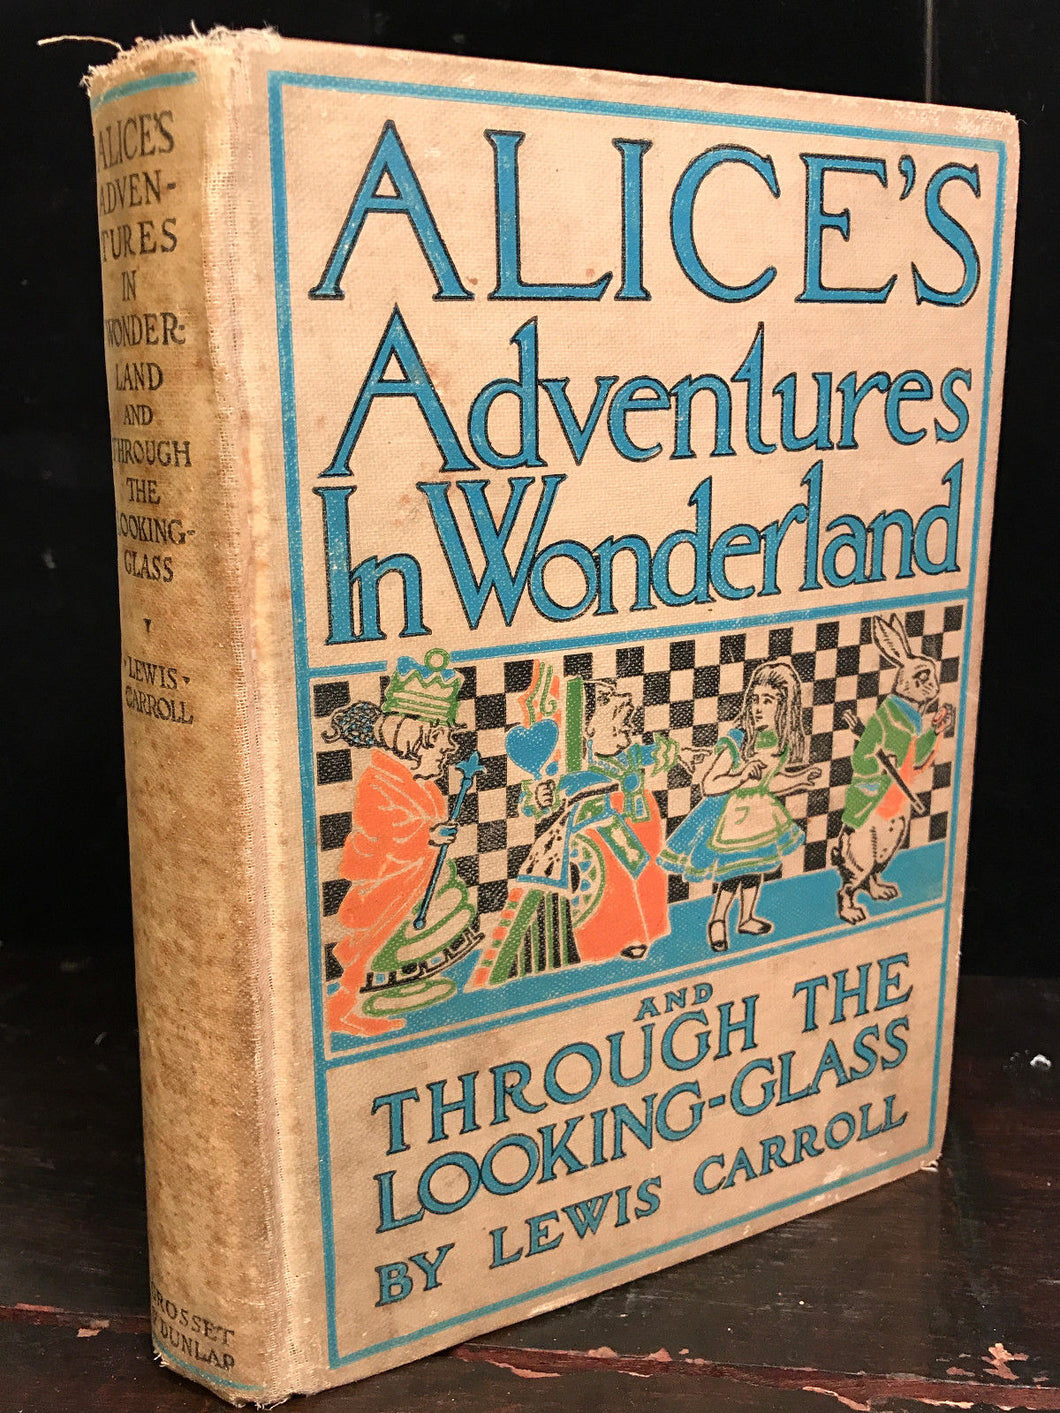 ALICE'S ADVENTURES IN WONDERLAND, Lewis Carroll, 1st/1st PHOTOPLAY EDITION 1919